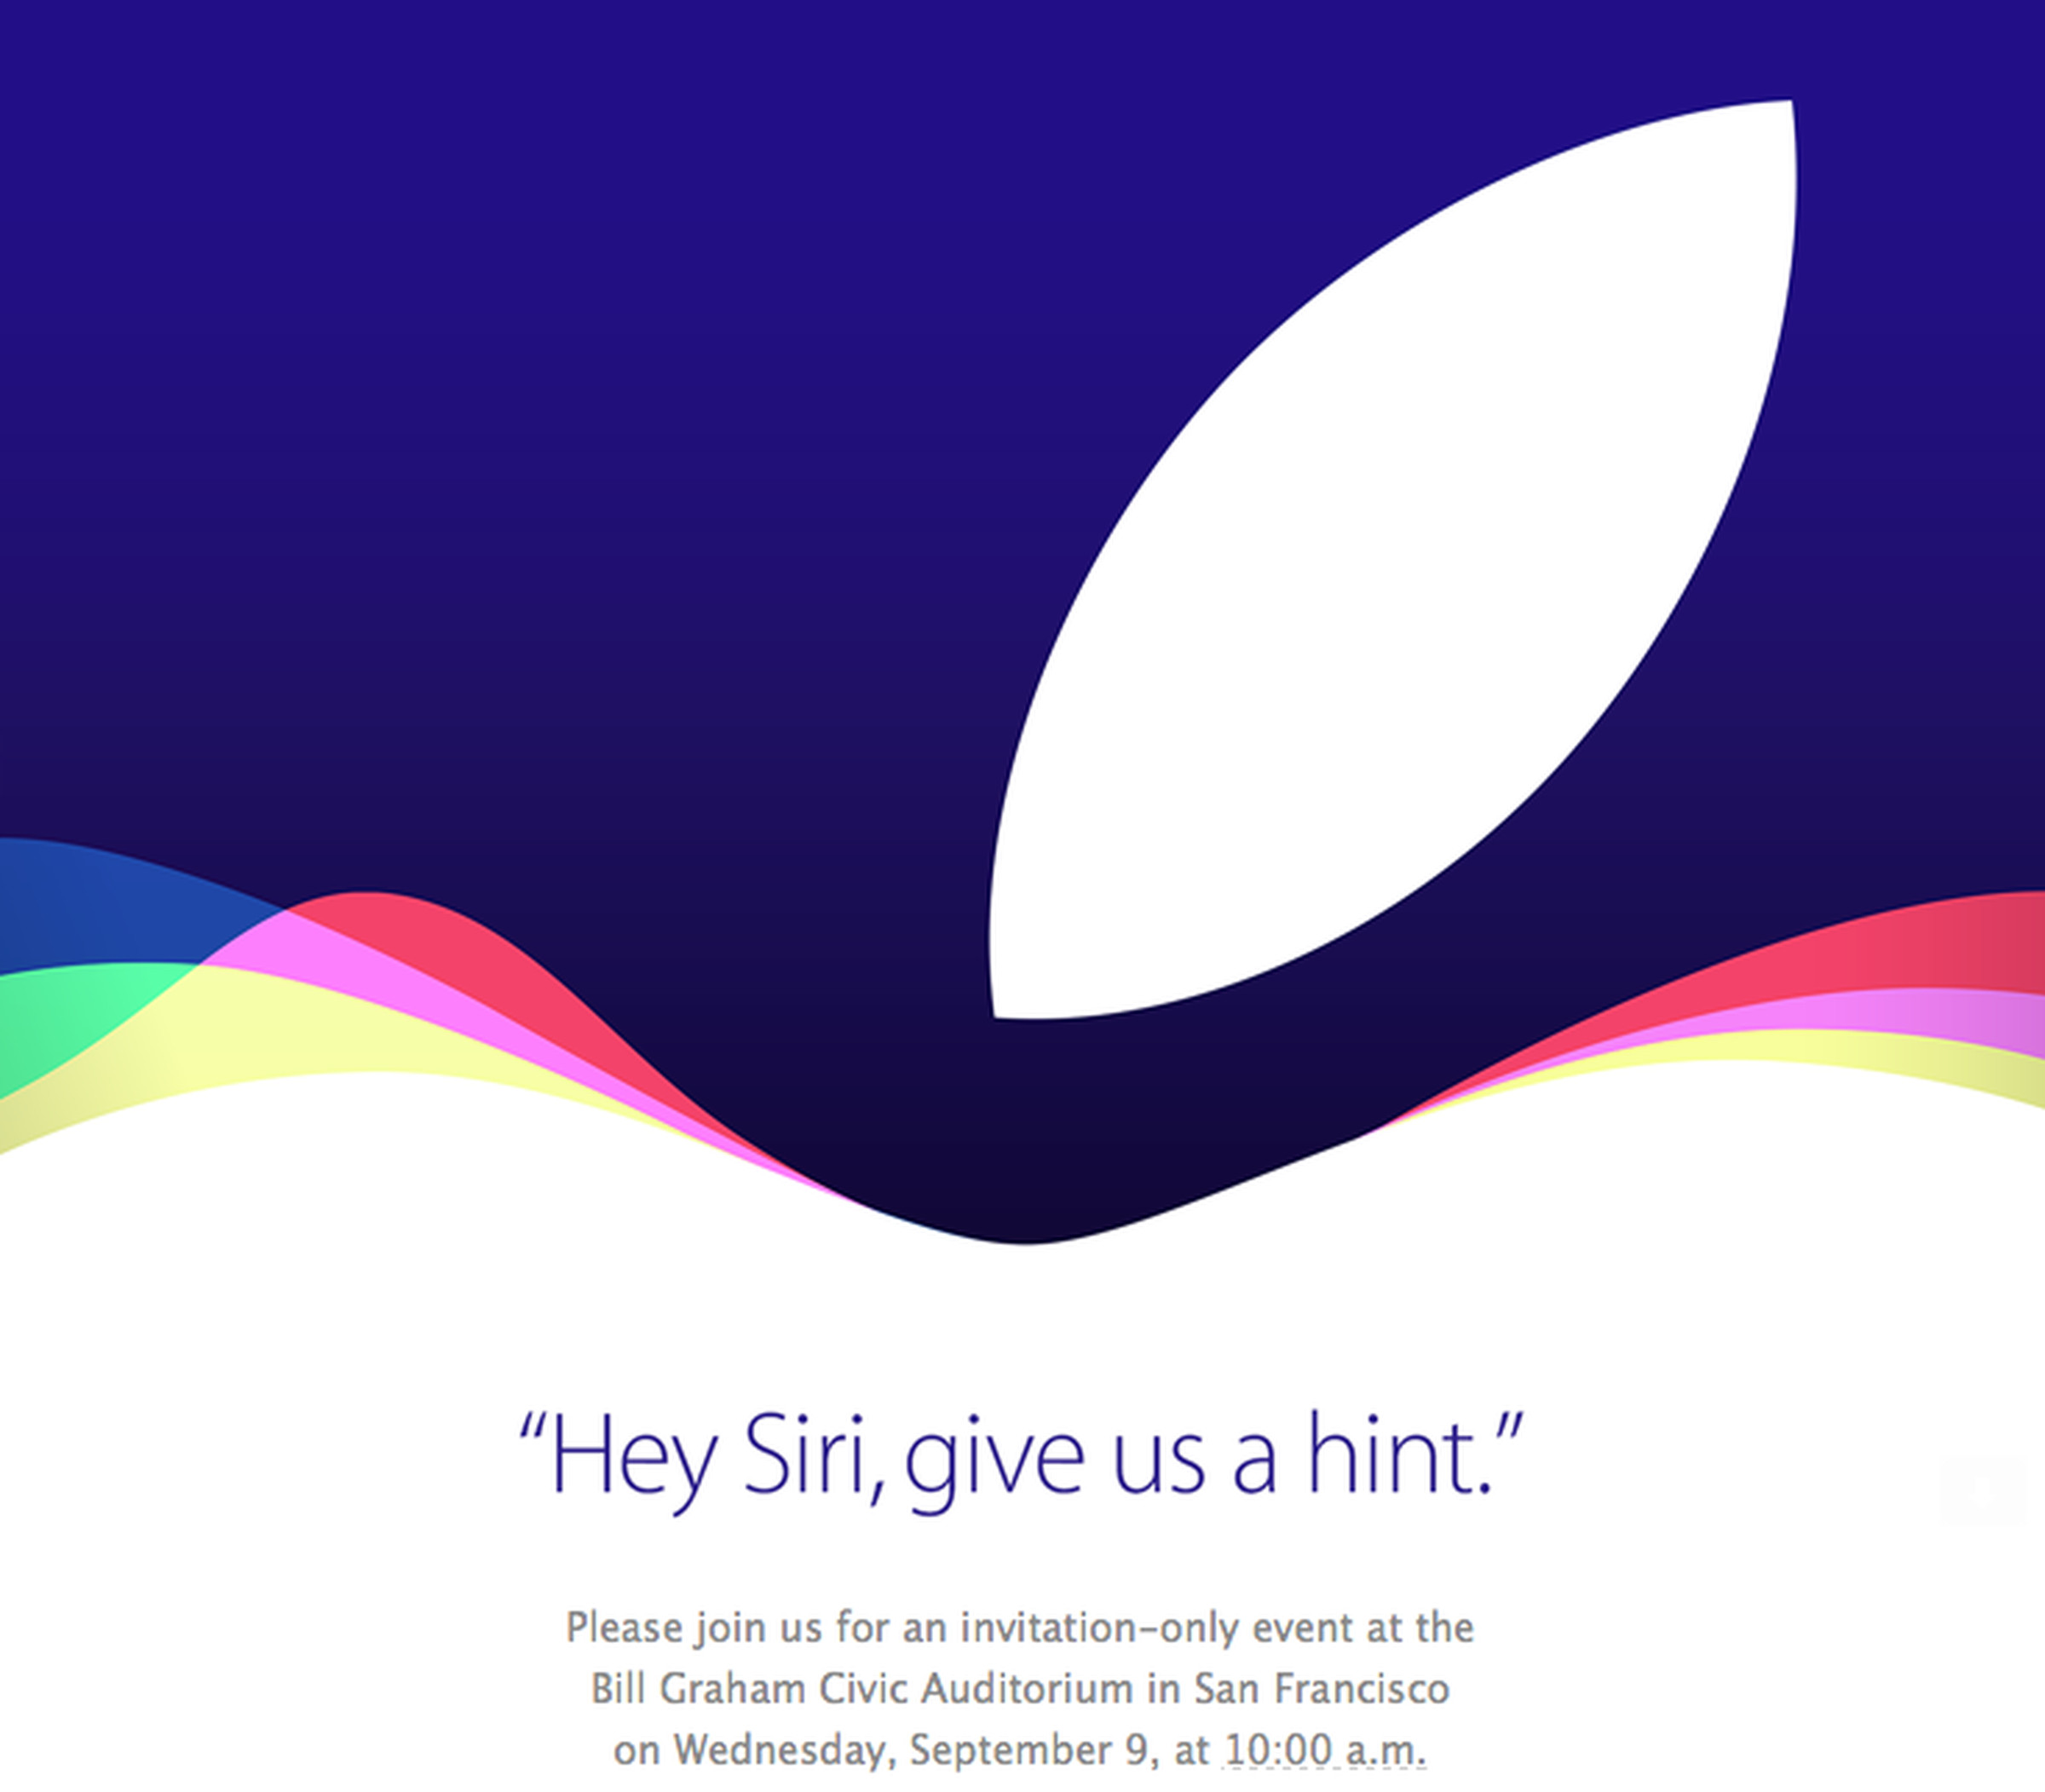 An Apple logo with a colorful waveform rising off the top edge of the Apple. Text beneath it reads “Hey Siri, give us a hint.”